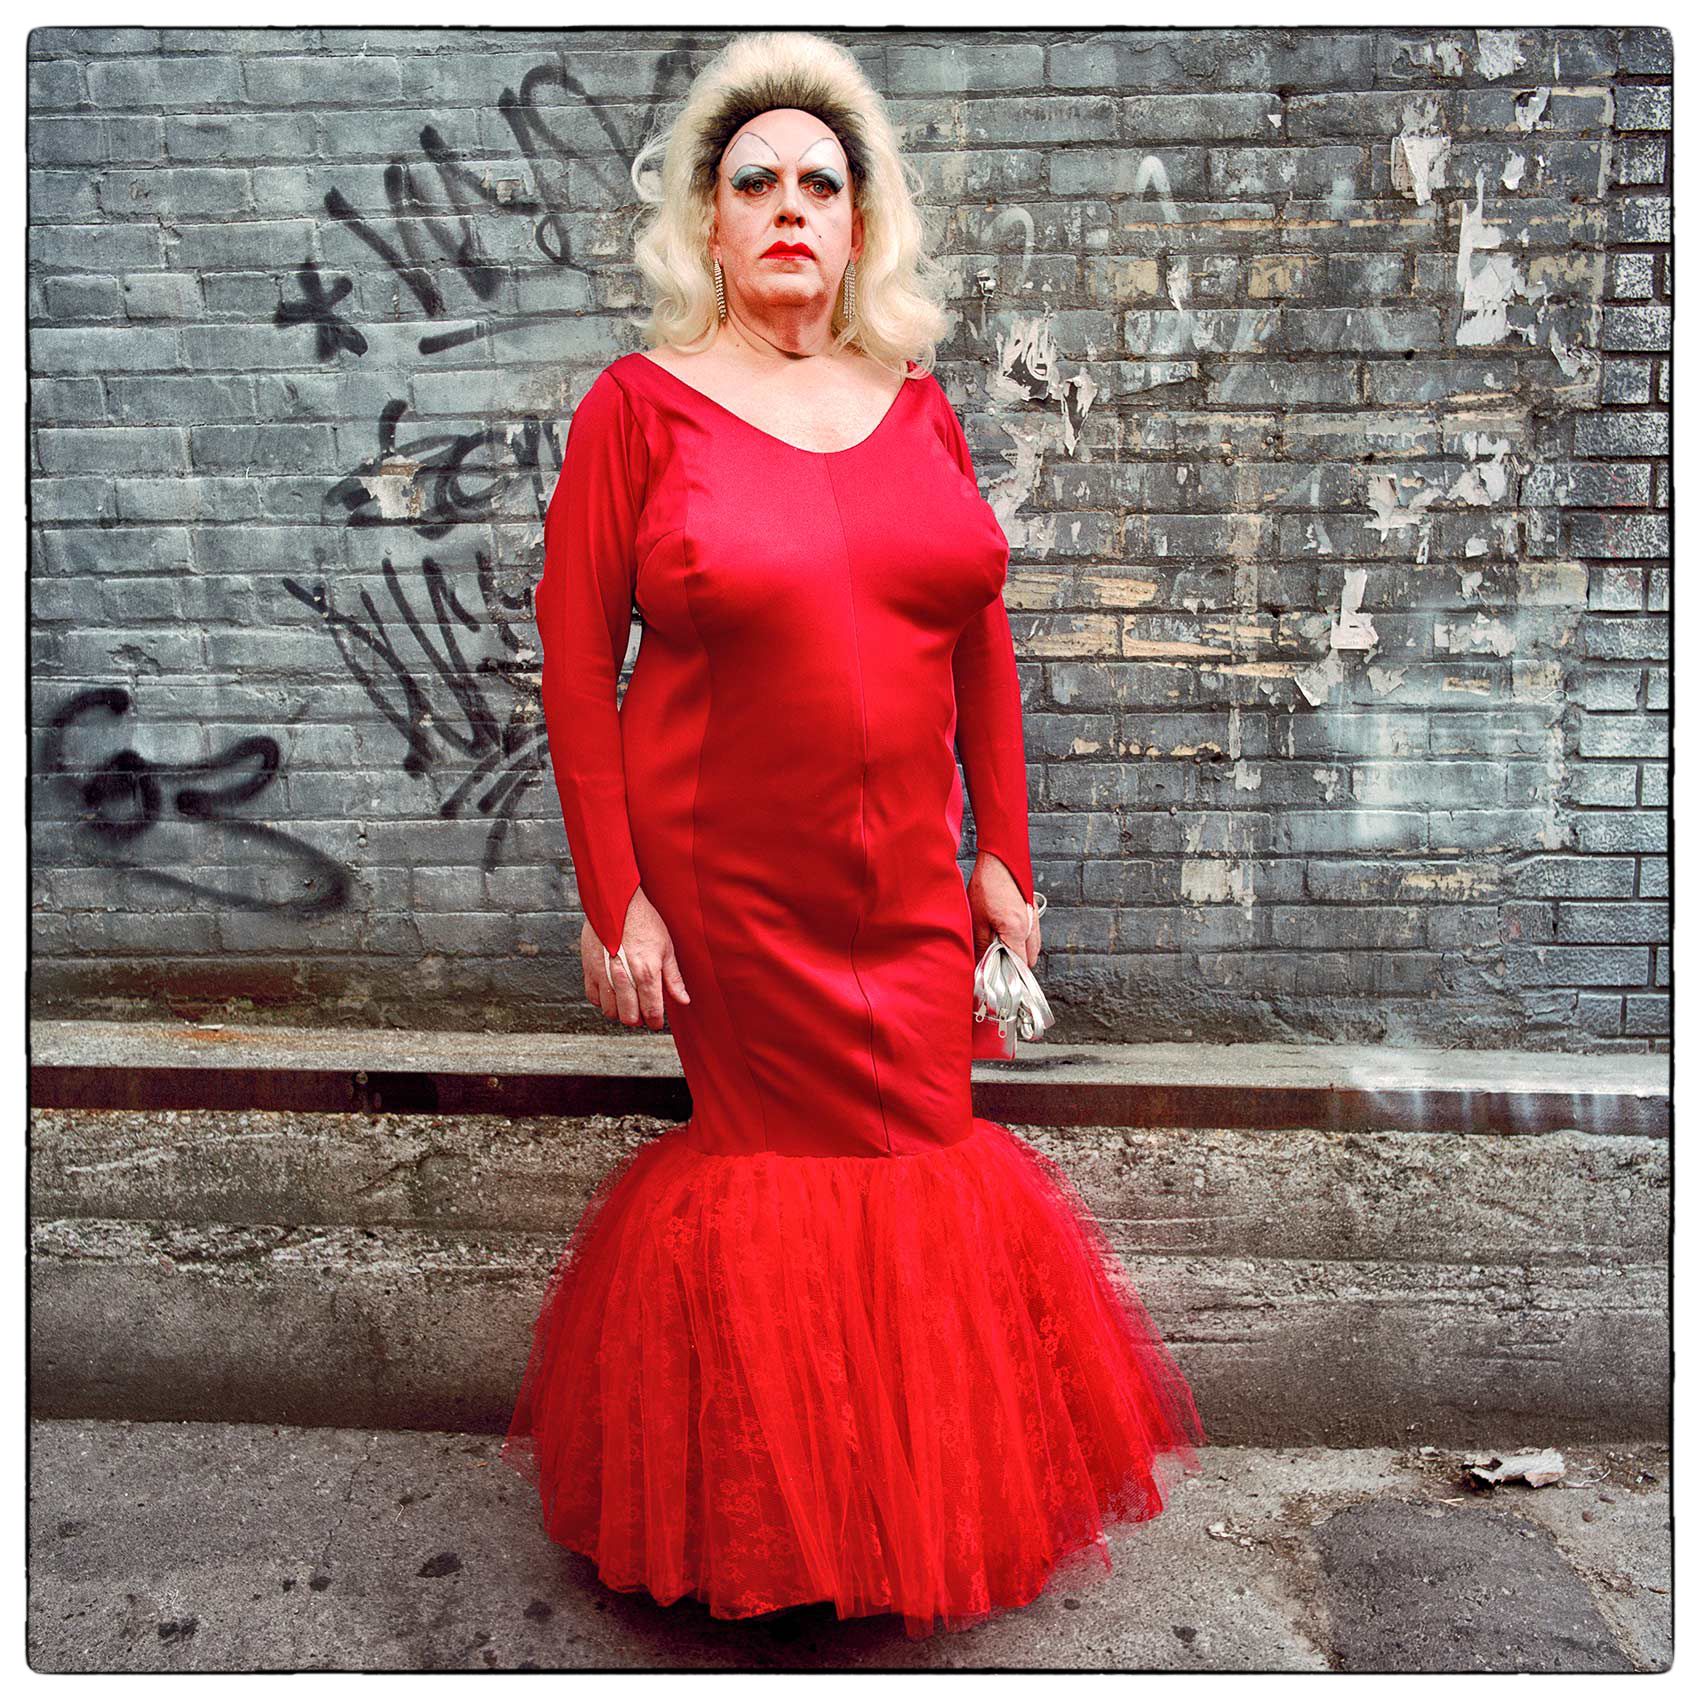 a-drag-queen-poses-for-a-photo-in-an-alleyway-during-toronto-pride